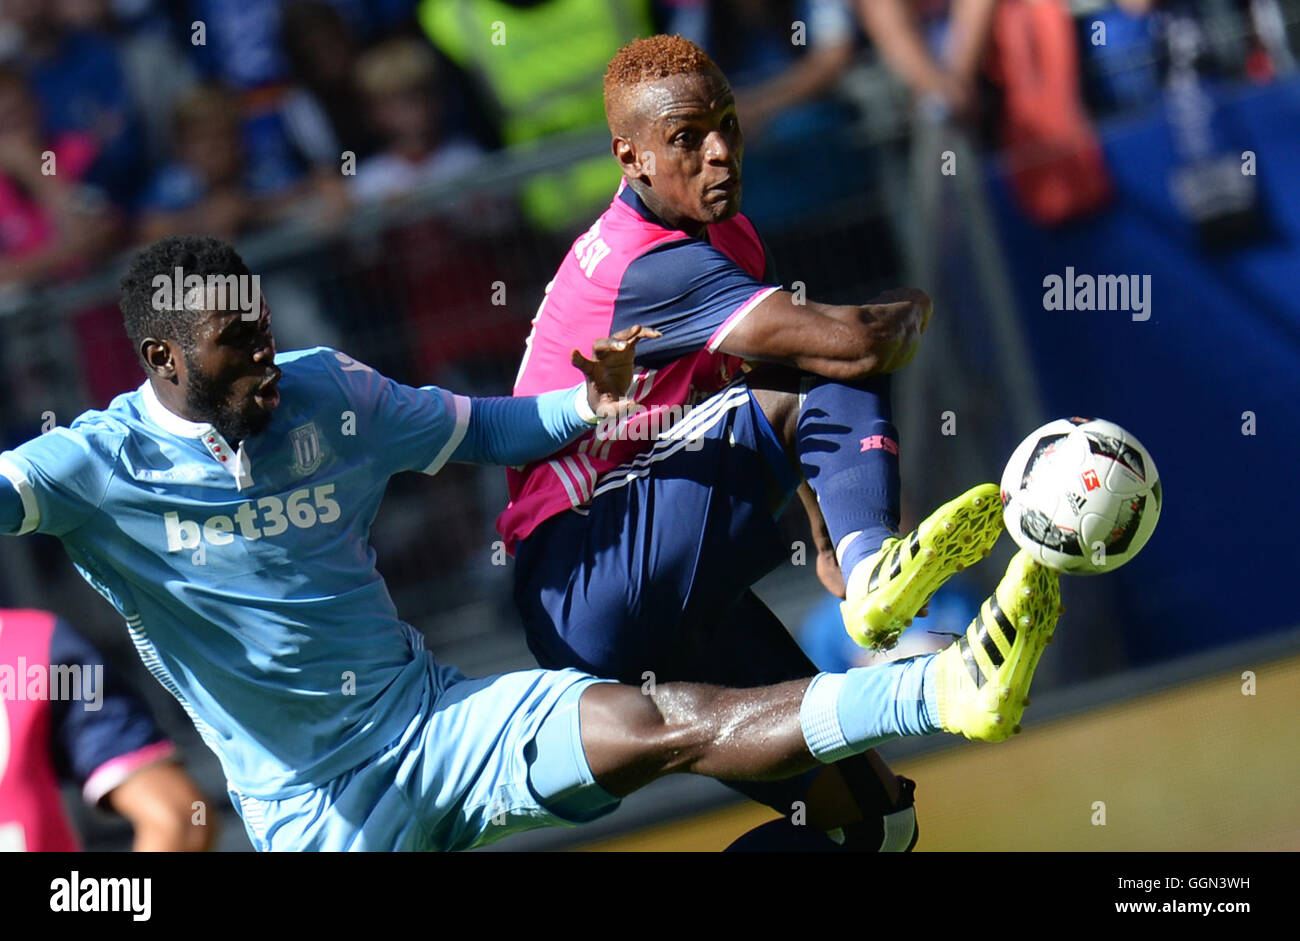 Hamburg, Germany. 06th Aug, 2016. Hamburg's Cleber Reis (R) and Stoke City's Mame Diouf vie for the ball during a test match between Hamburger SV and Stoke City F.C. in the Volksparkstadion in Hamburg, Germany, 06 August 2016. Photo: DANIEL REINHARDT/dpa/Alamy Live News Stock Photo